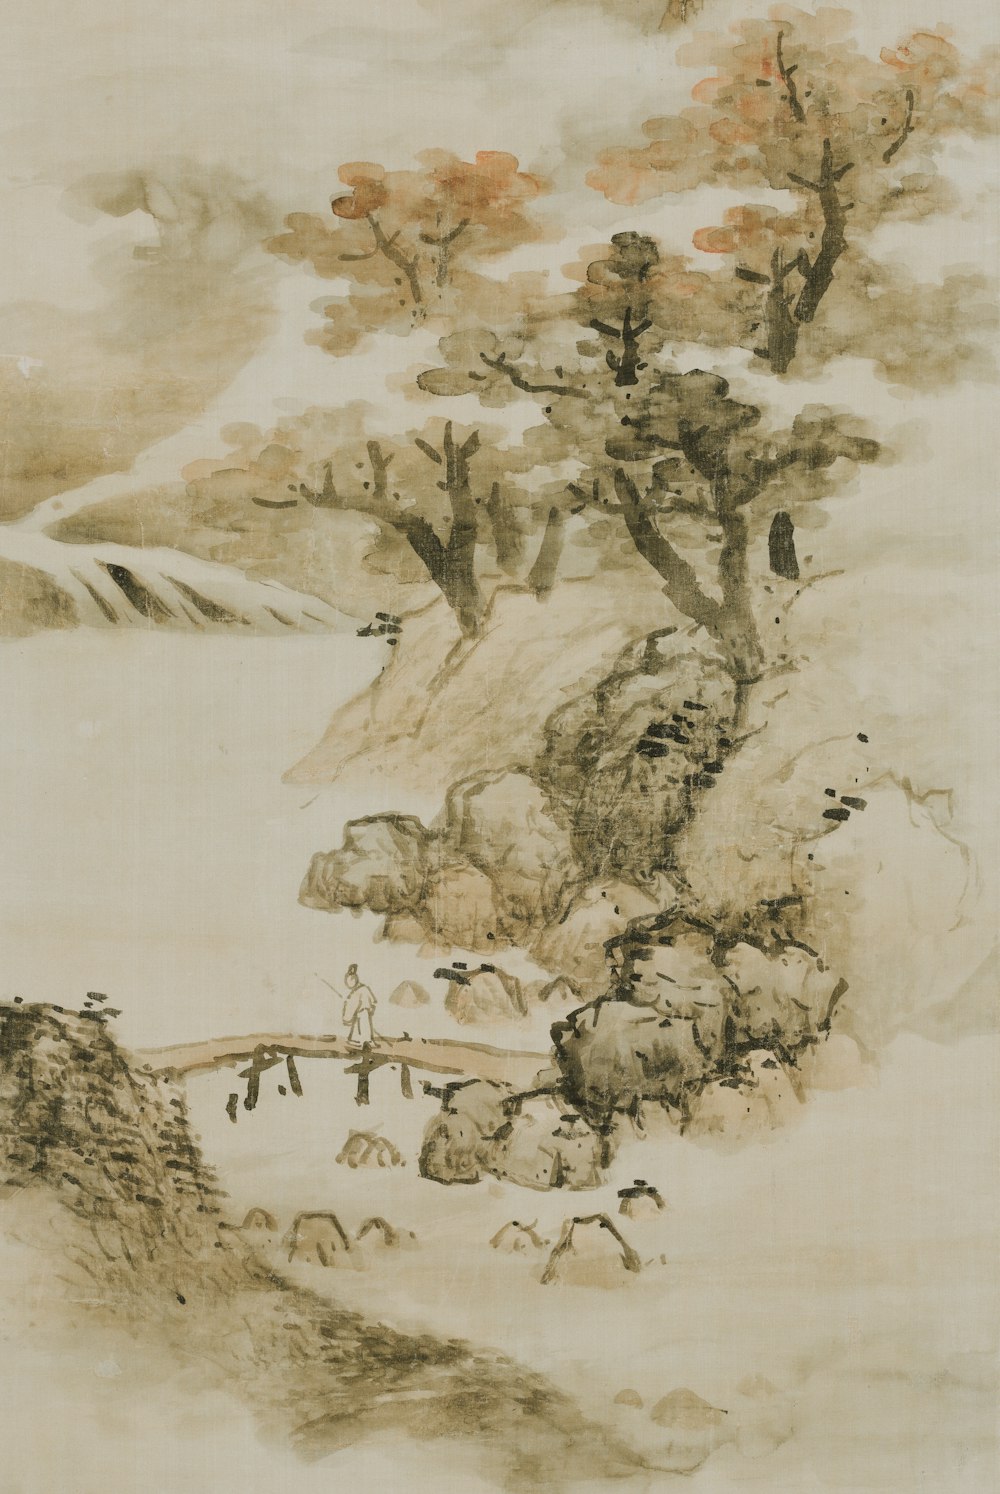 a painting of a landscape with trees and animals